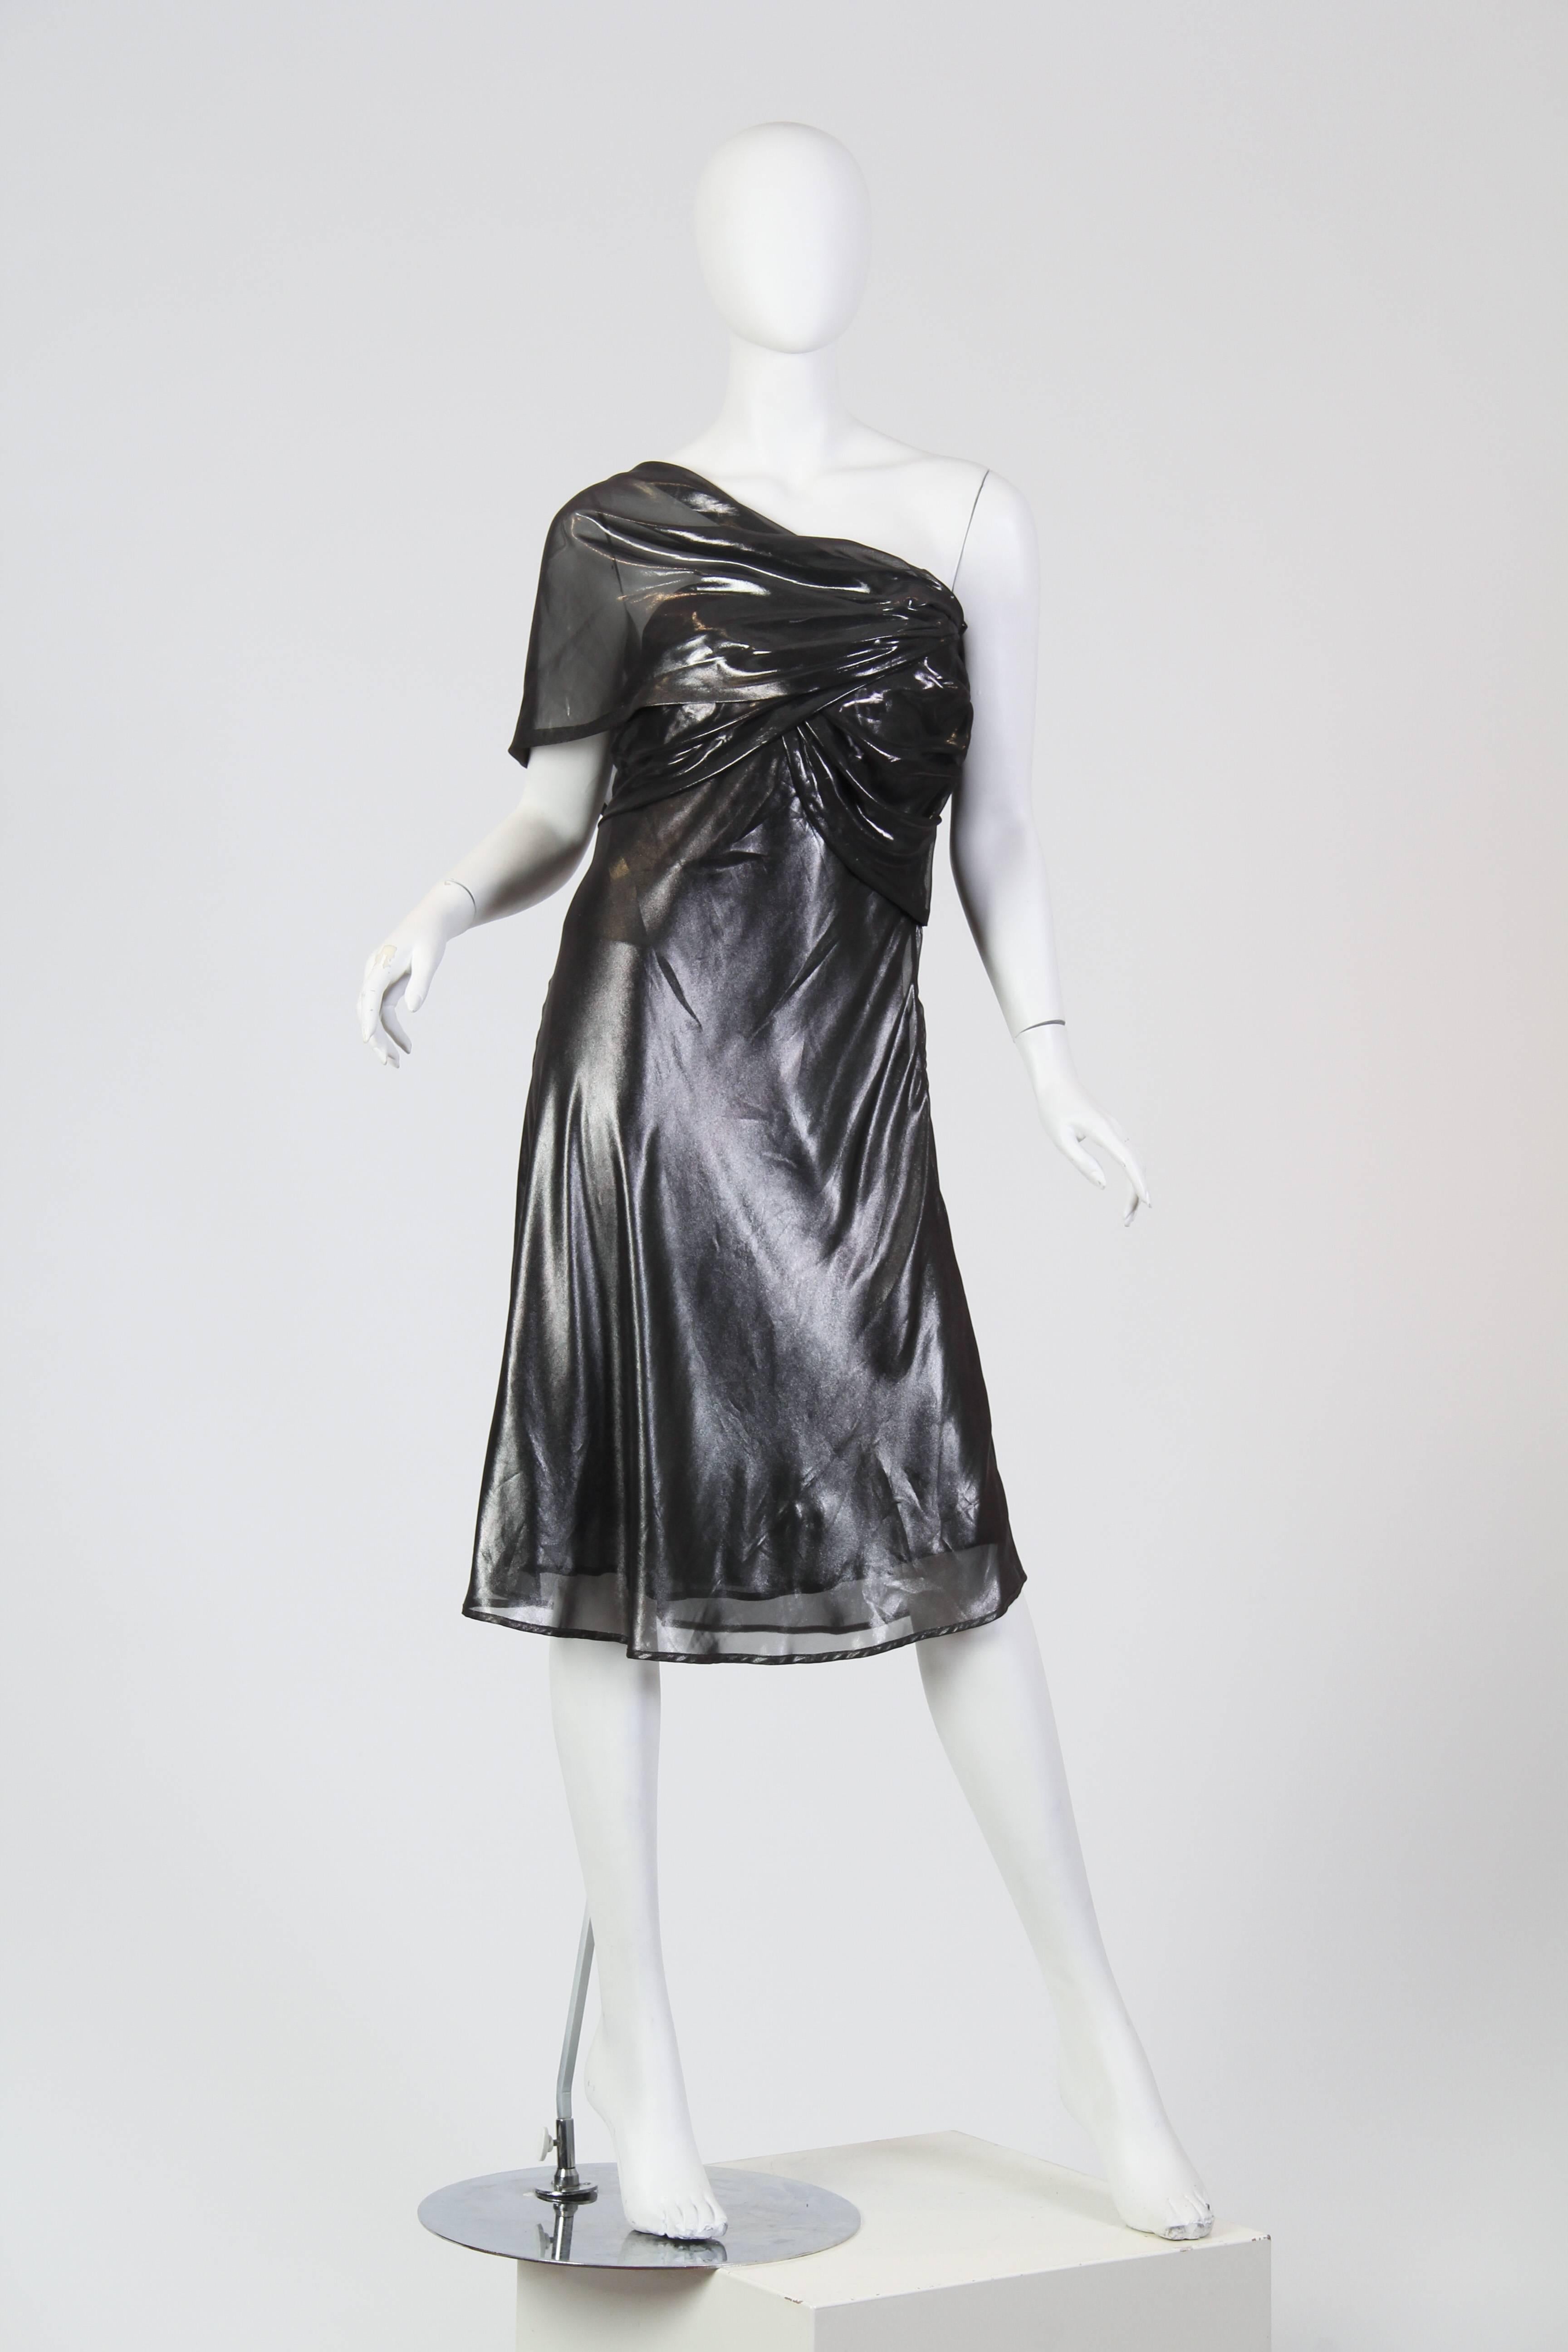 This is a striking satin dress by Krizia. In gunmetal-silver, the glimmering satin falls in flutes and gathers like liquid metal and smooth the curves of the body. Sheer gathered pieces highlight the bust and flow around the ribs and shoulders to